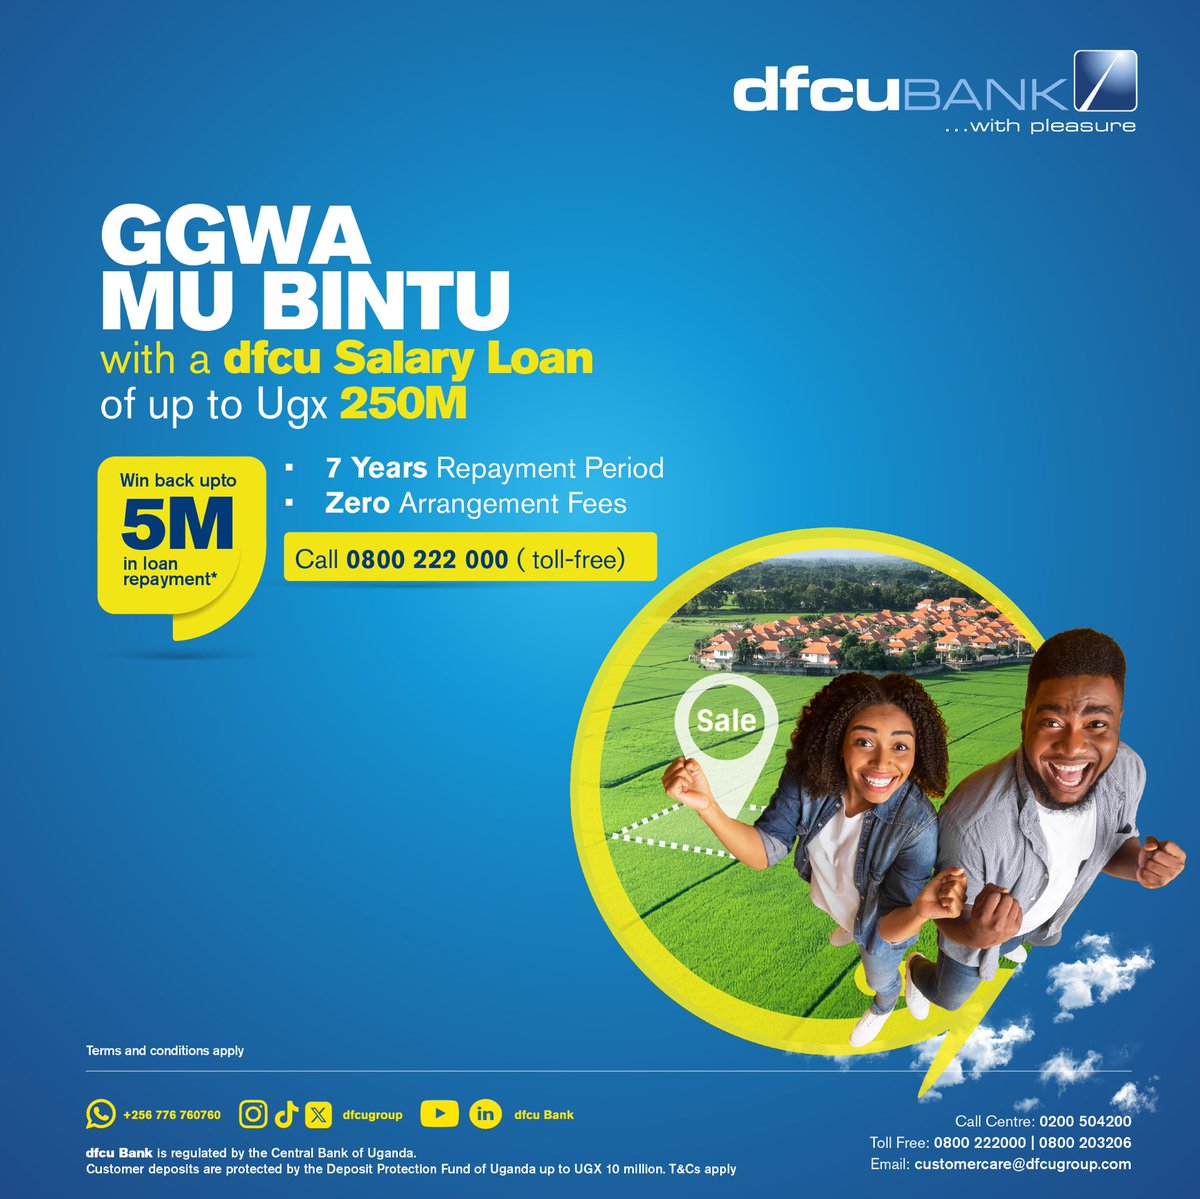 #GgwaMuBintu with the dfcu Unsecured Salary Loan. Get up to UGX 250 Million for a period of up to 7 years. Visit dfcugroup.com/promotions/ to apply now. #TransformingLivesAndBusinesses